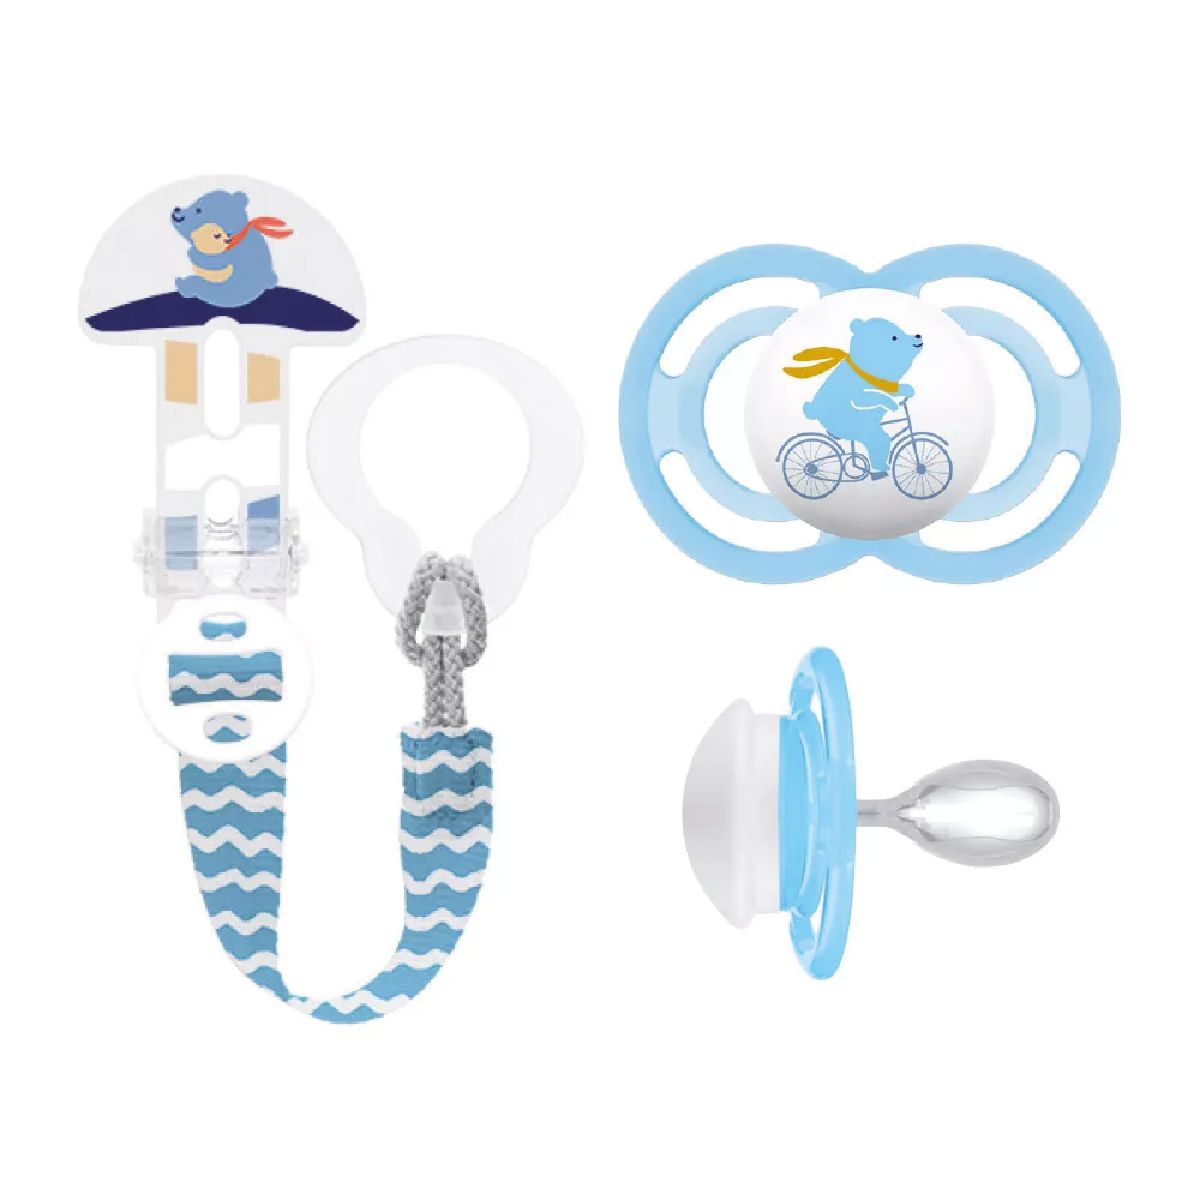 MAM Perfect 16+ & Clip it! Flow - Pacifier and Clip